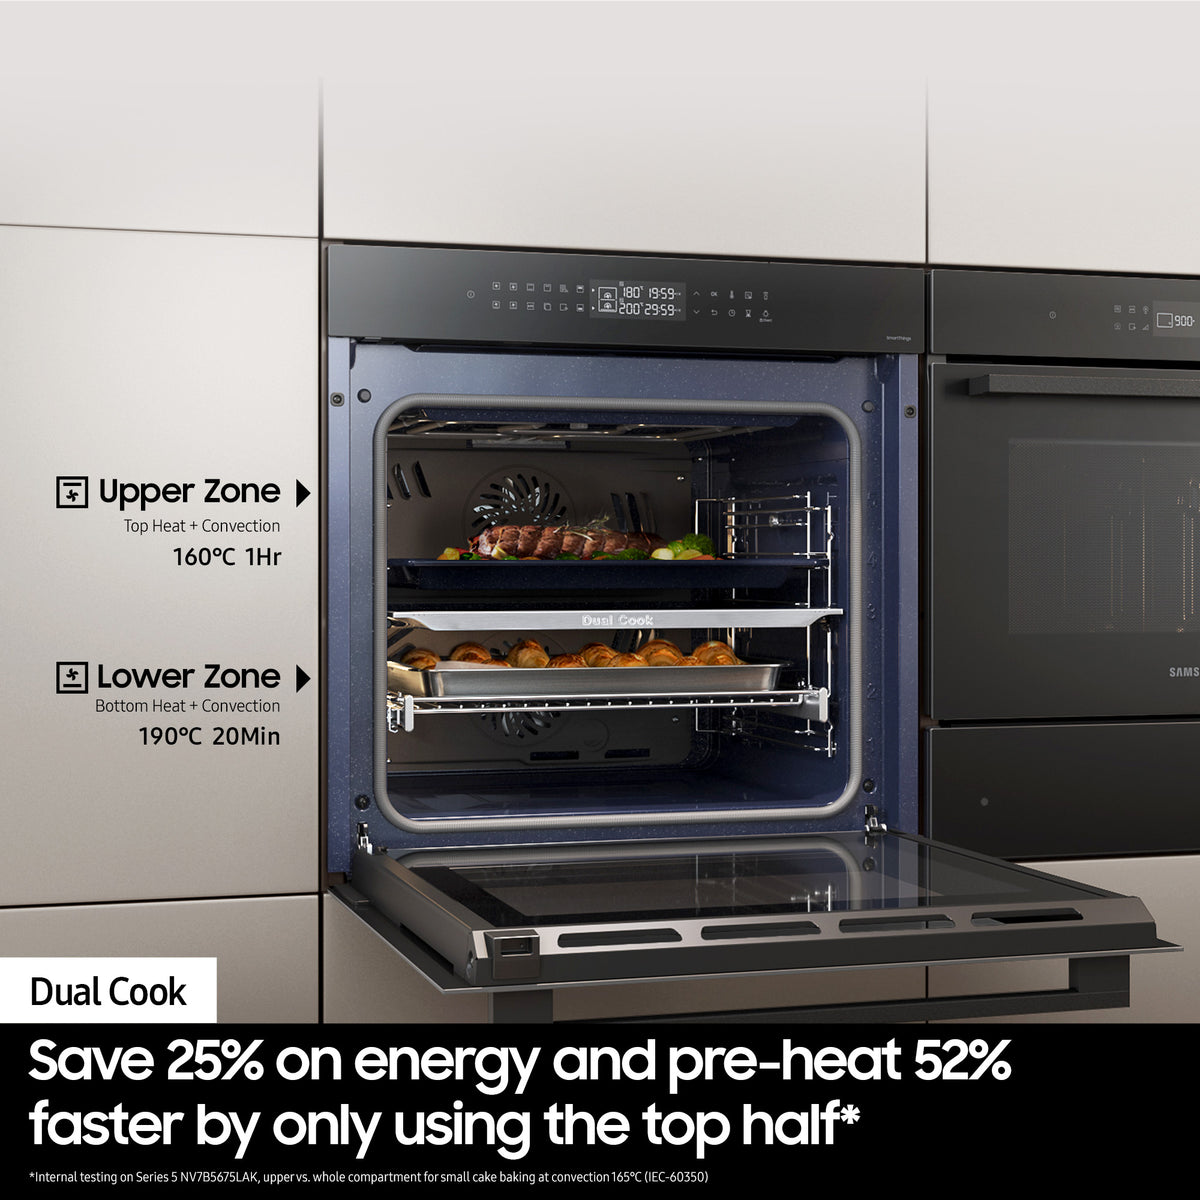 Samsung Series 4 76L Electric Smart Oven with Dual Cook - Stainless Steel | NV7B4430ZAS/U4 from Samsung - DID Electrical